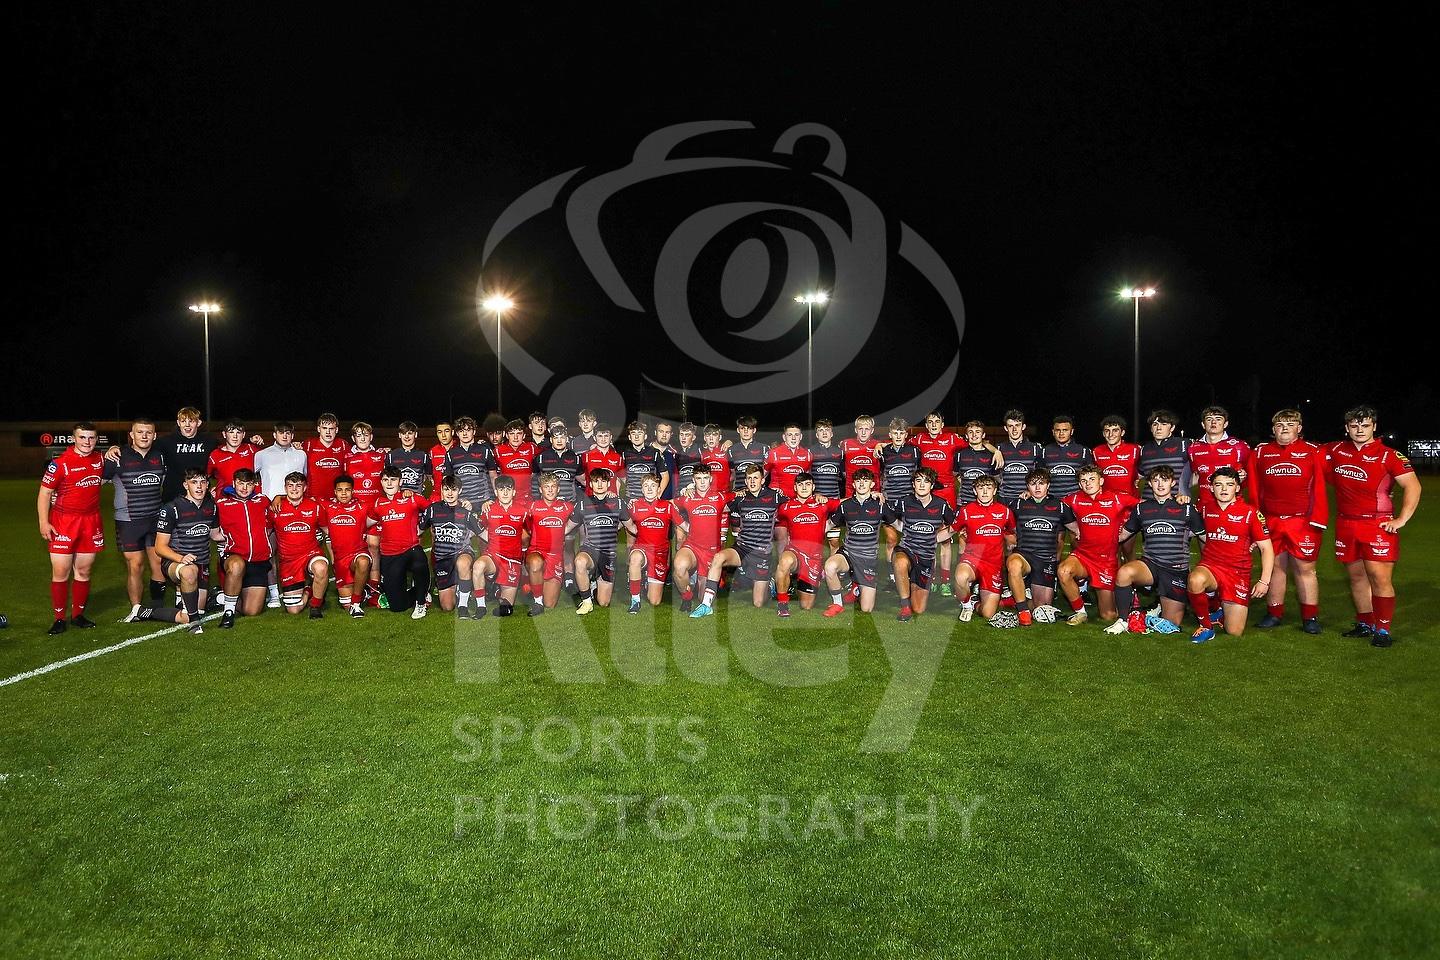 Scarlets Under 17 East and West Squads